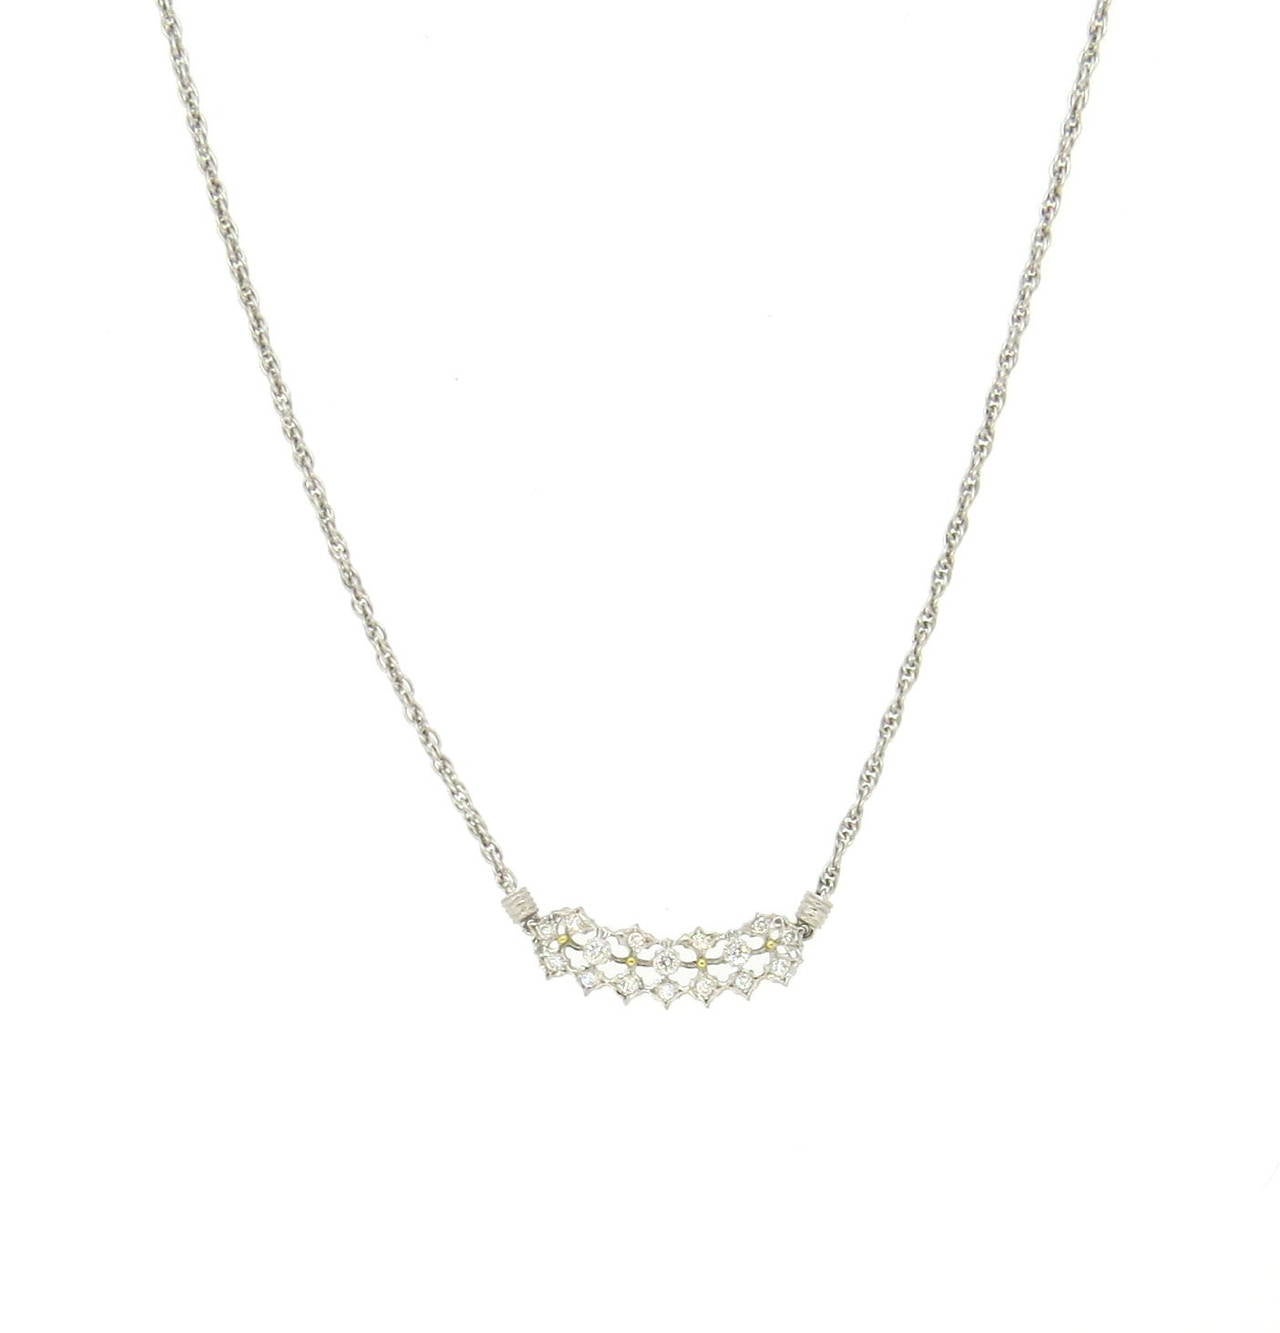 An 18k white gold pendant necklace set with 0.48ctw of G/VS diamonds.  Crafted by Mario Buccellati the necklace measures 16.5